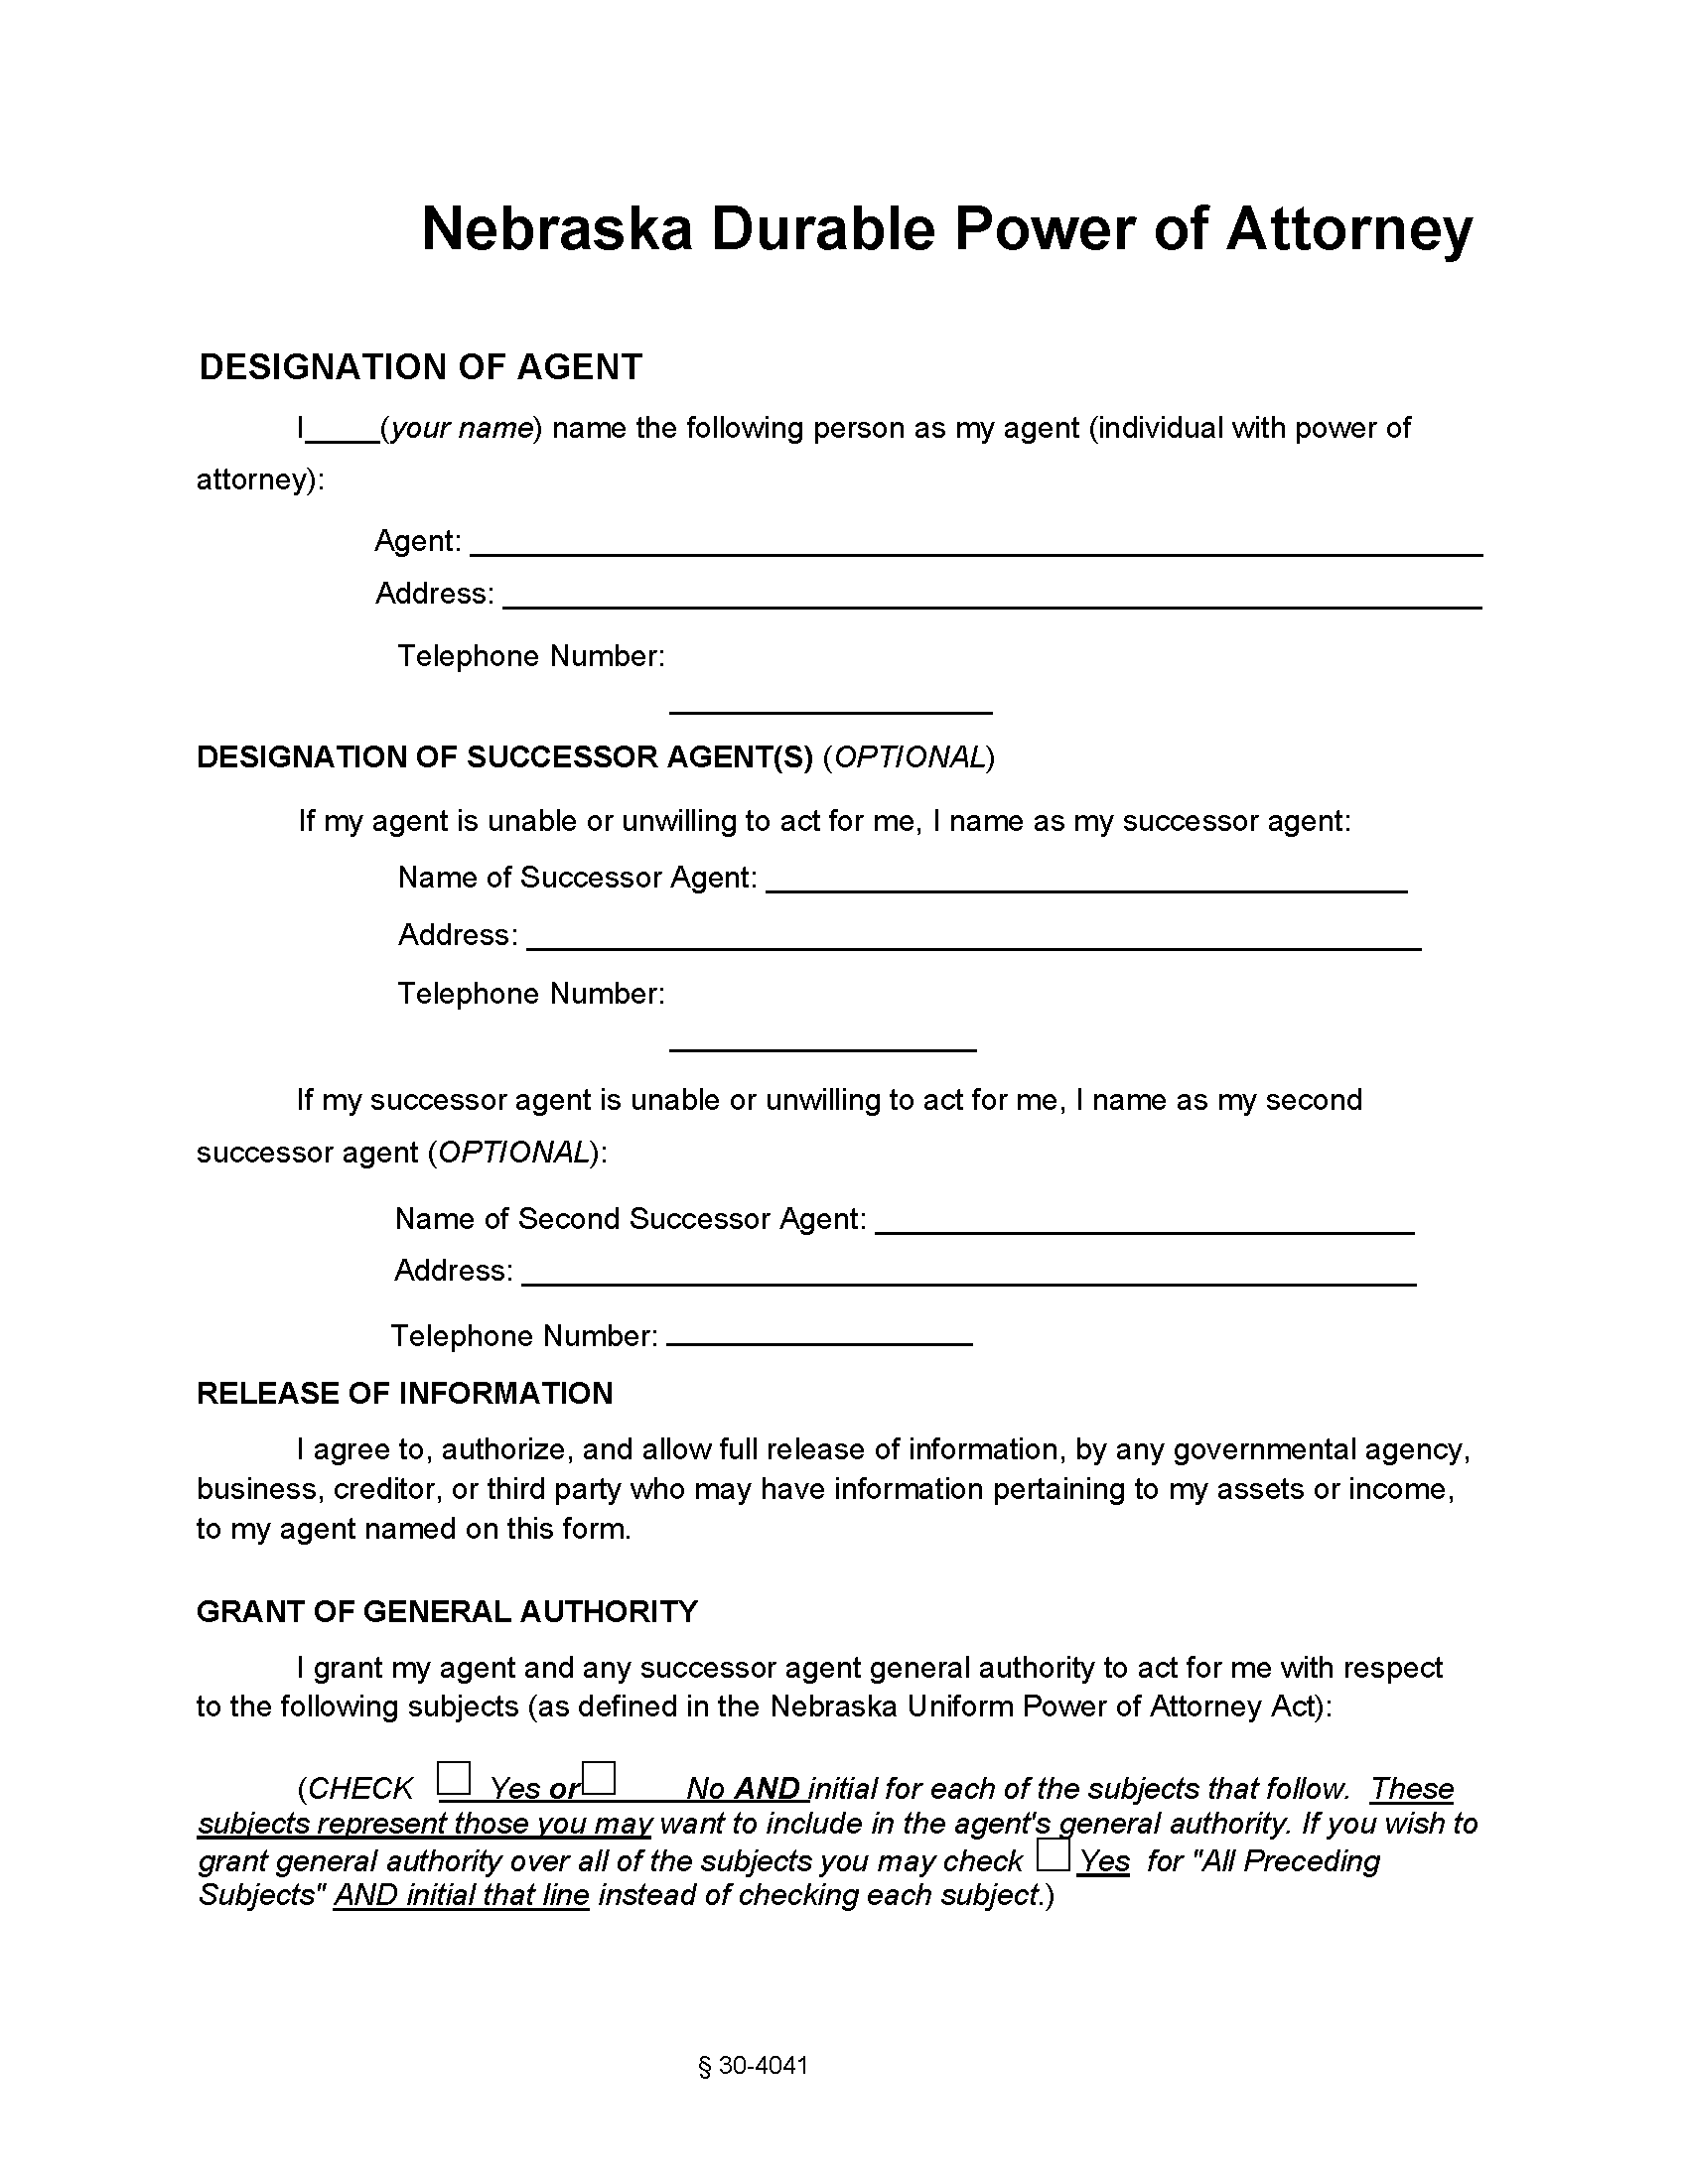 nebraska-durable-power-of-attorney-form-free-printable-legal-forms